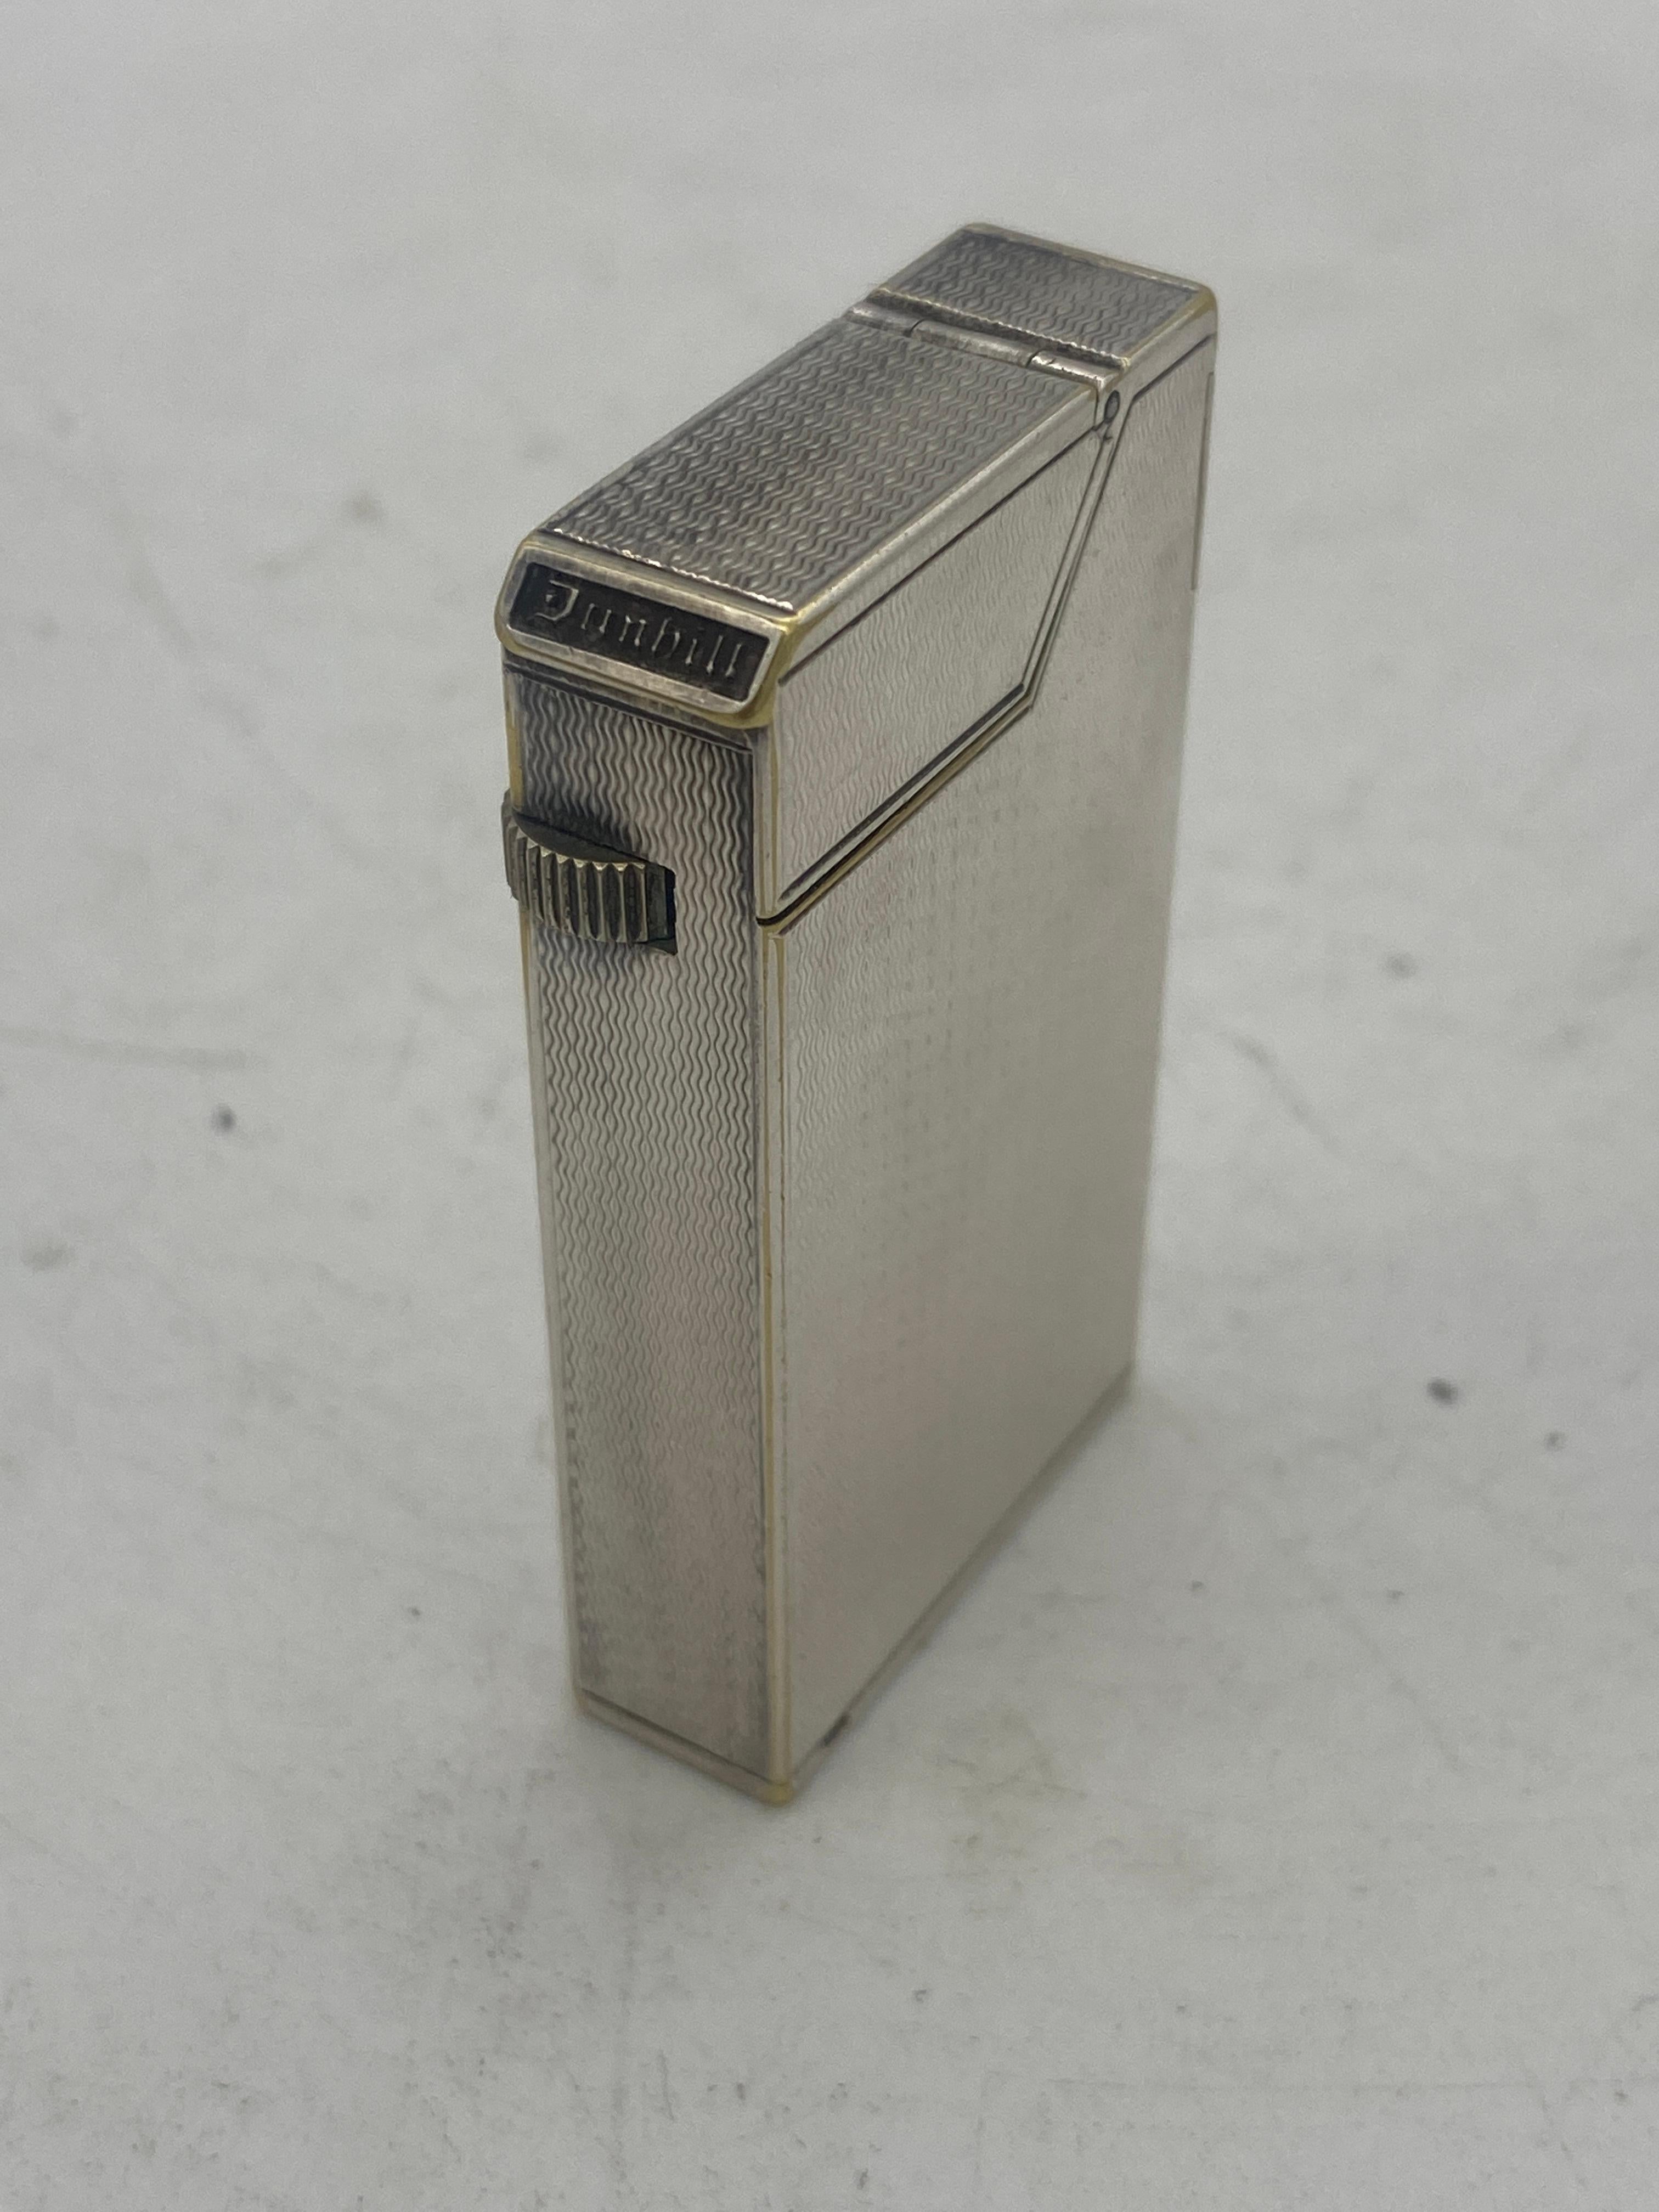 dunhill lighters for sale